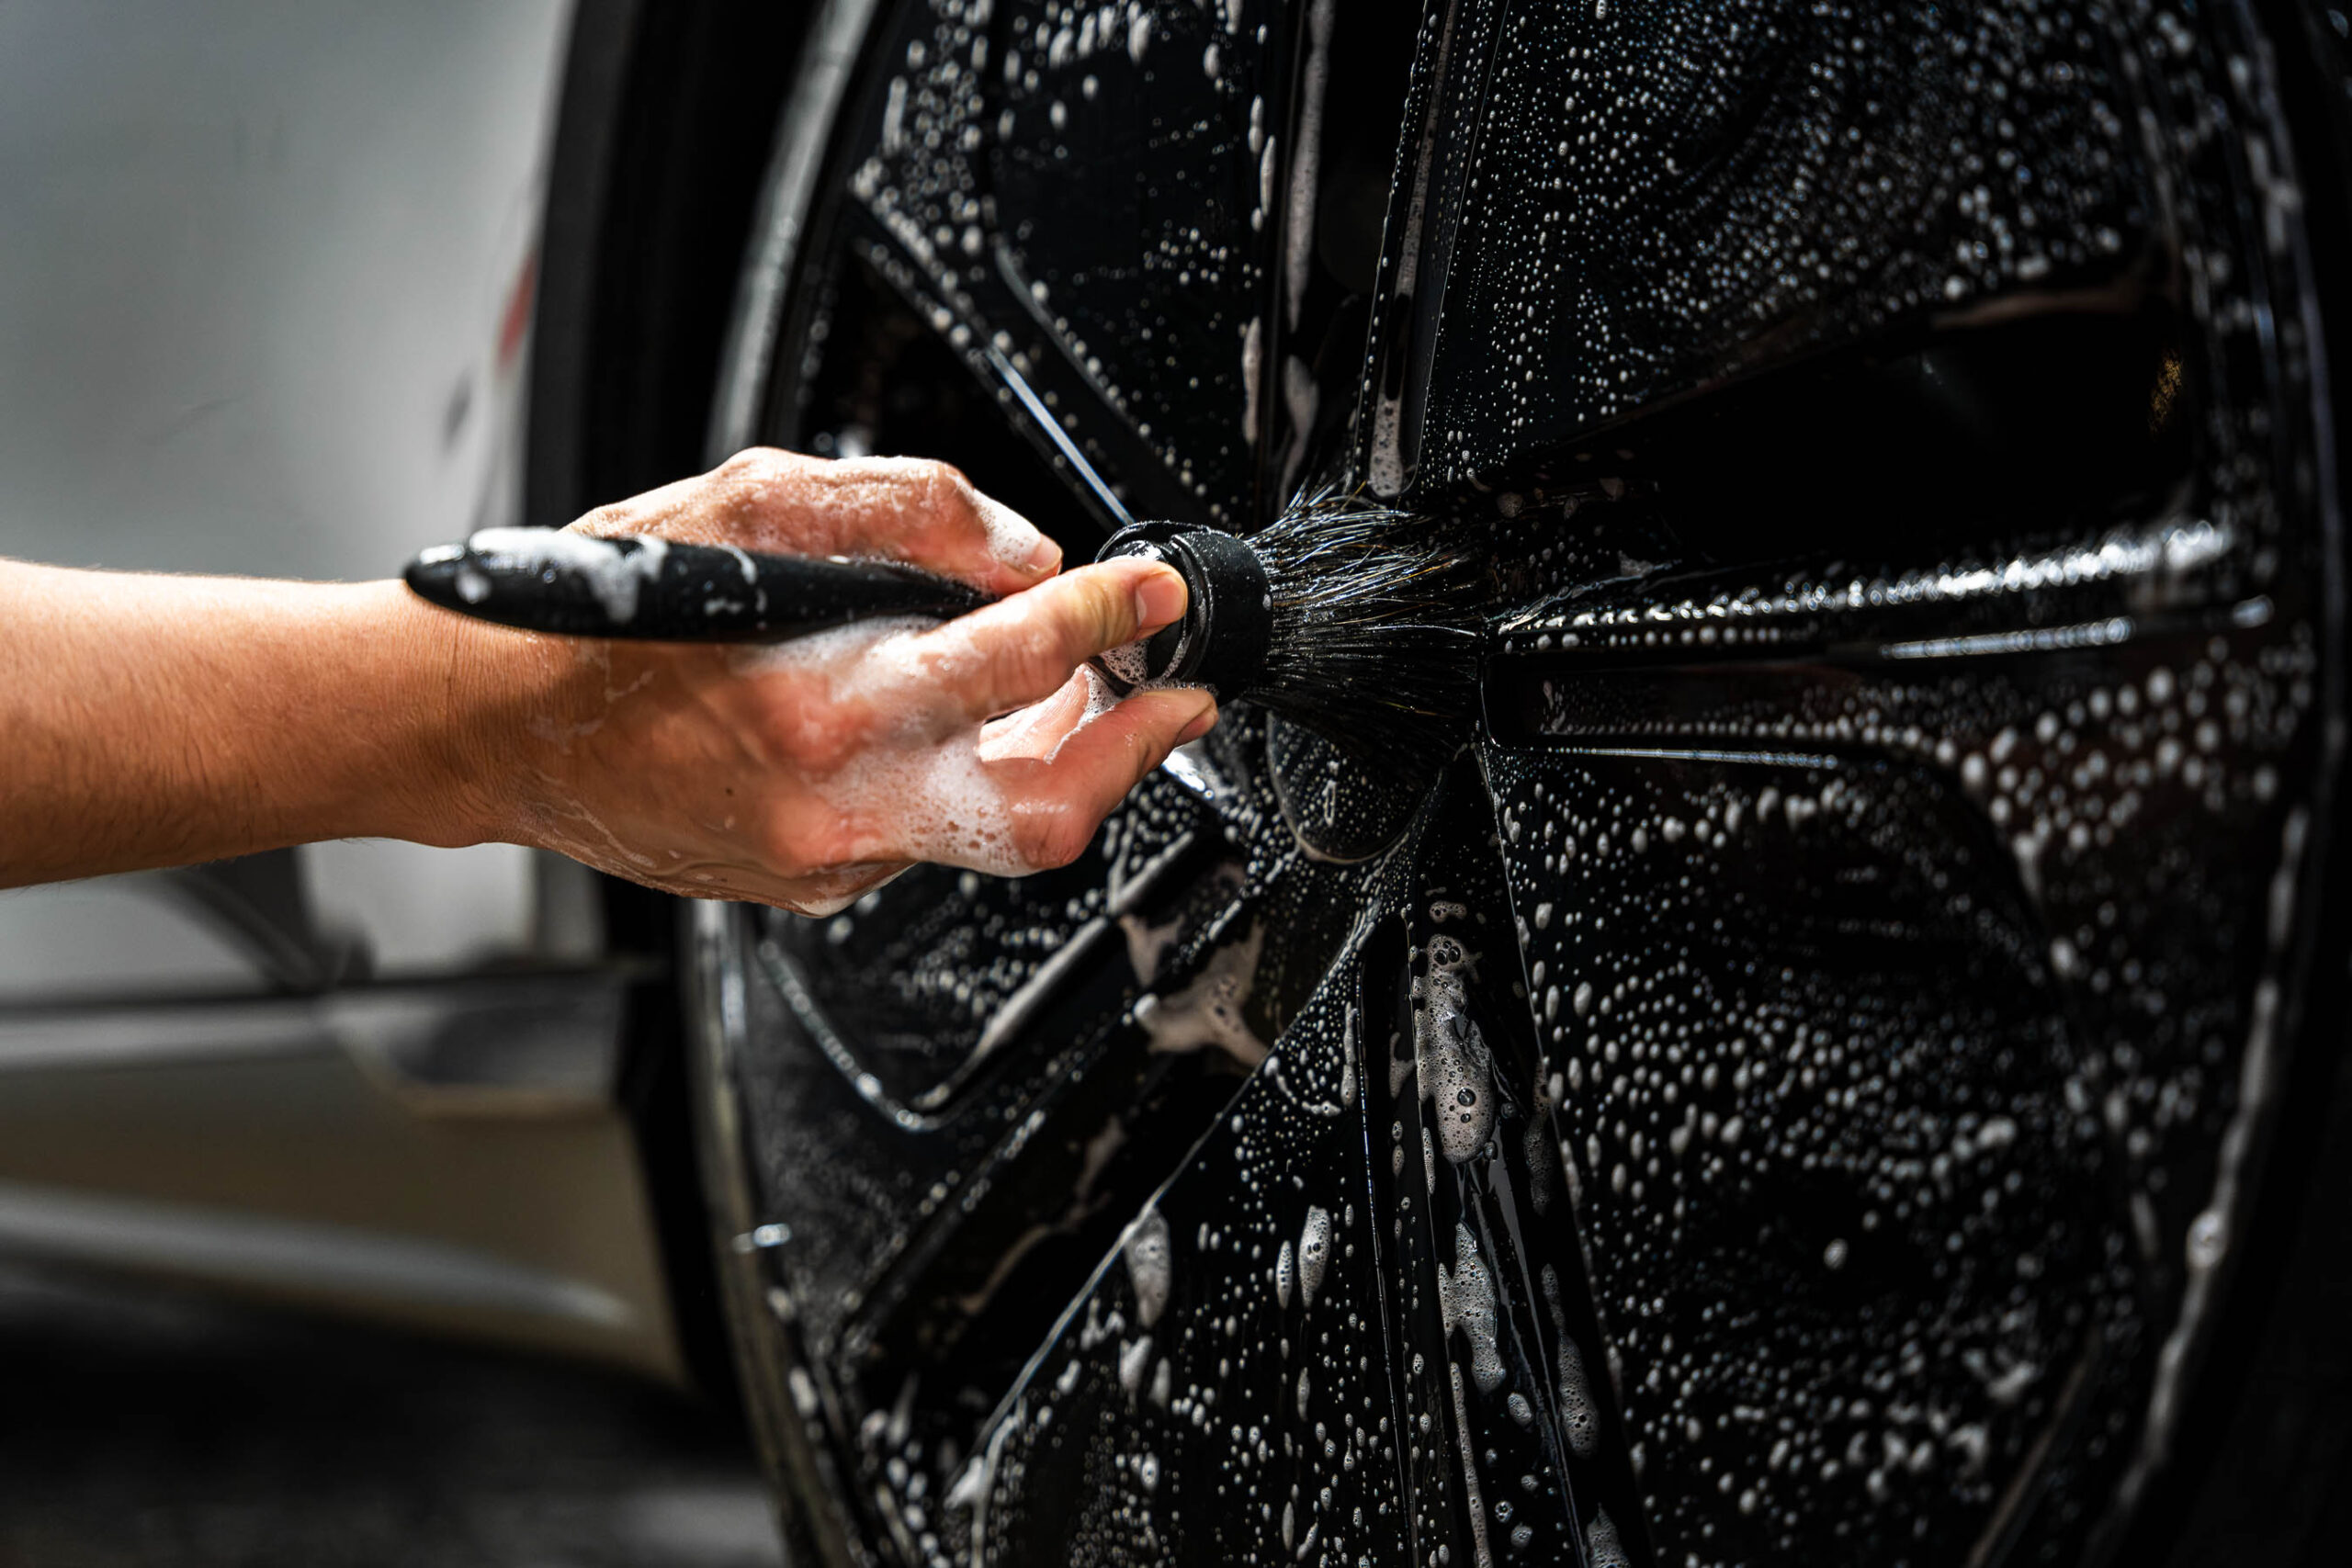 Using small brush to clean wheels